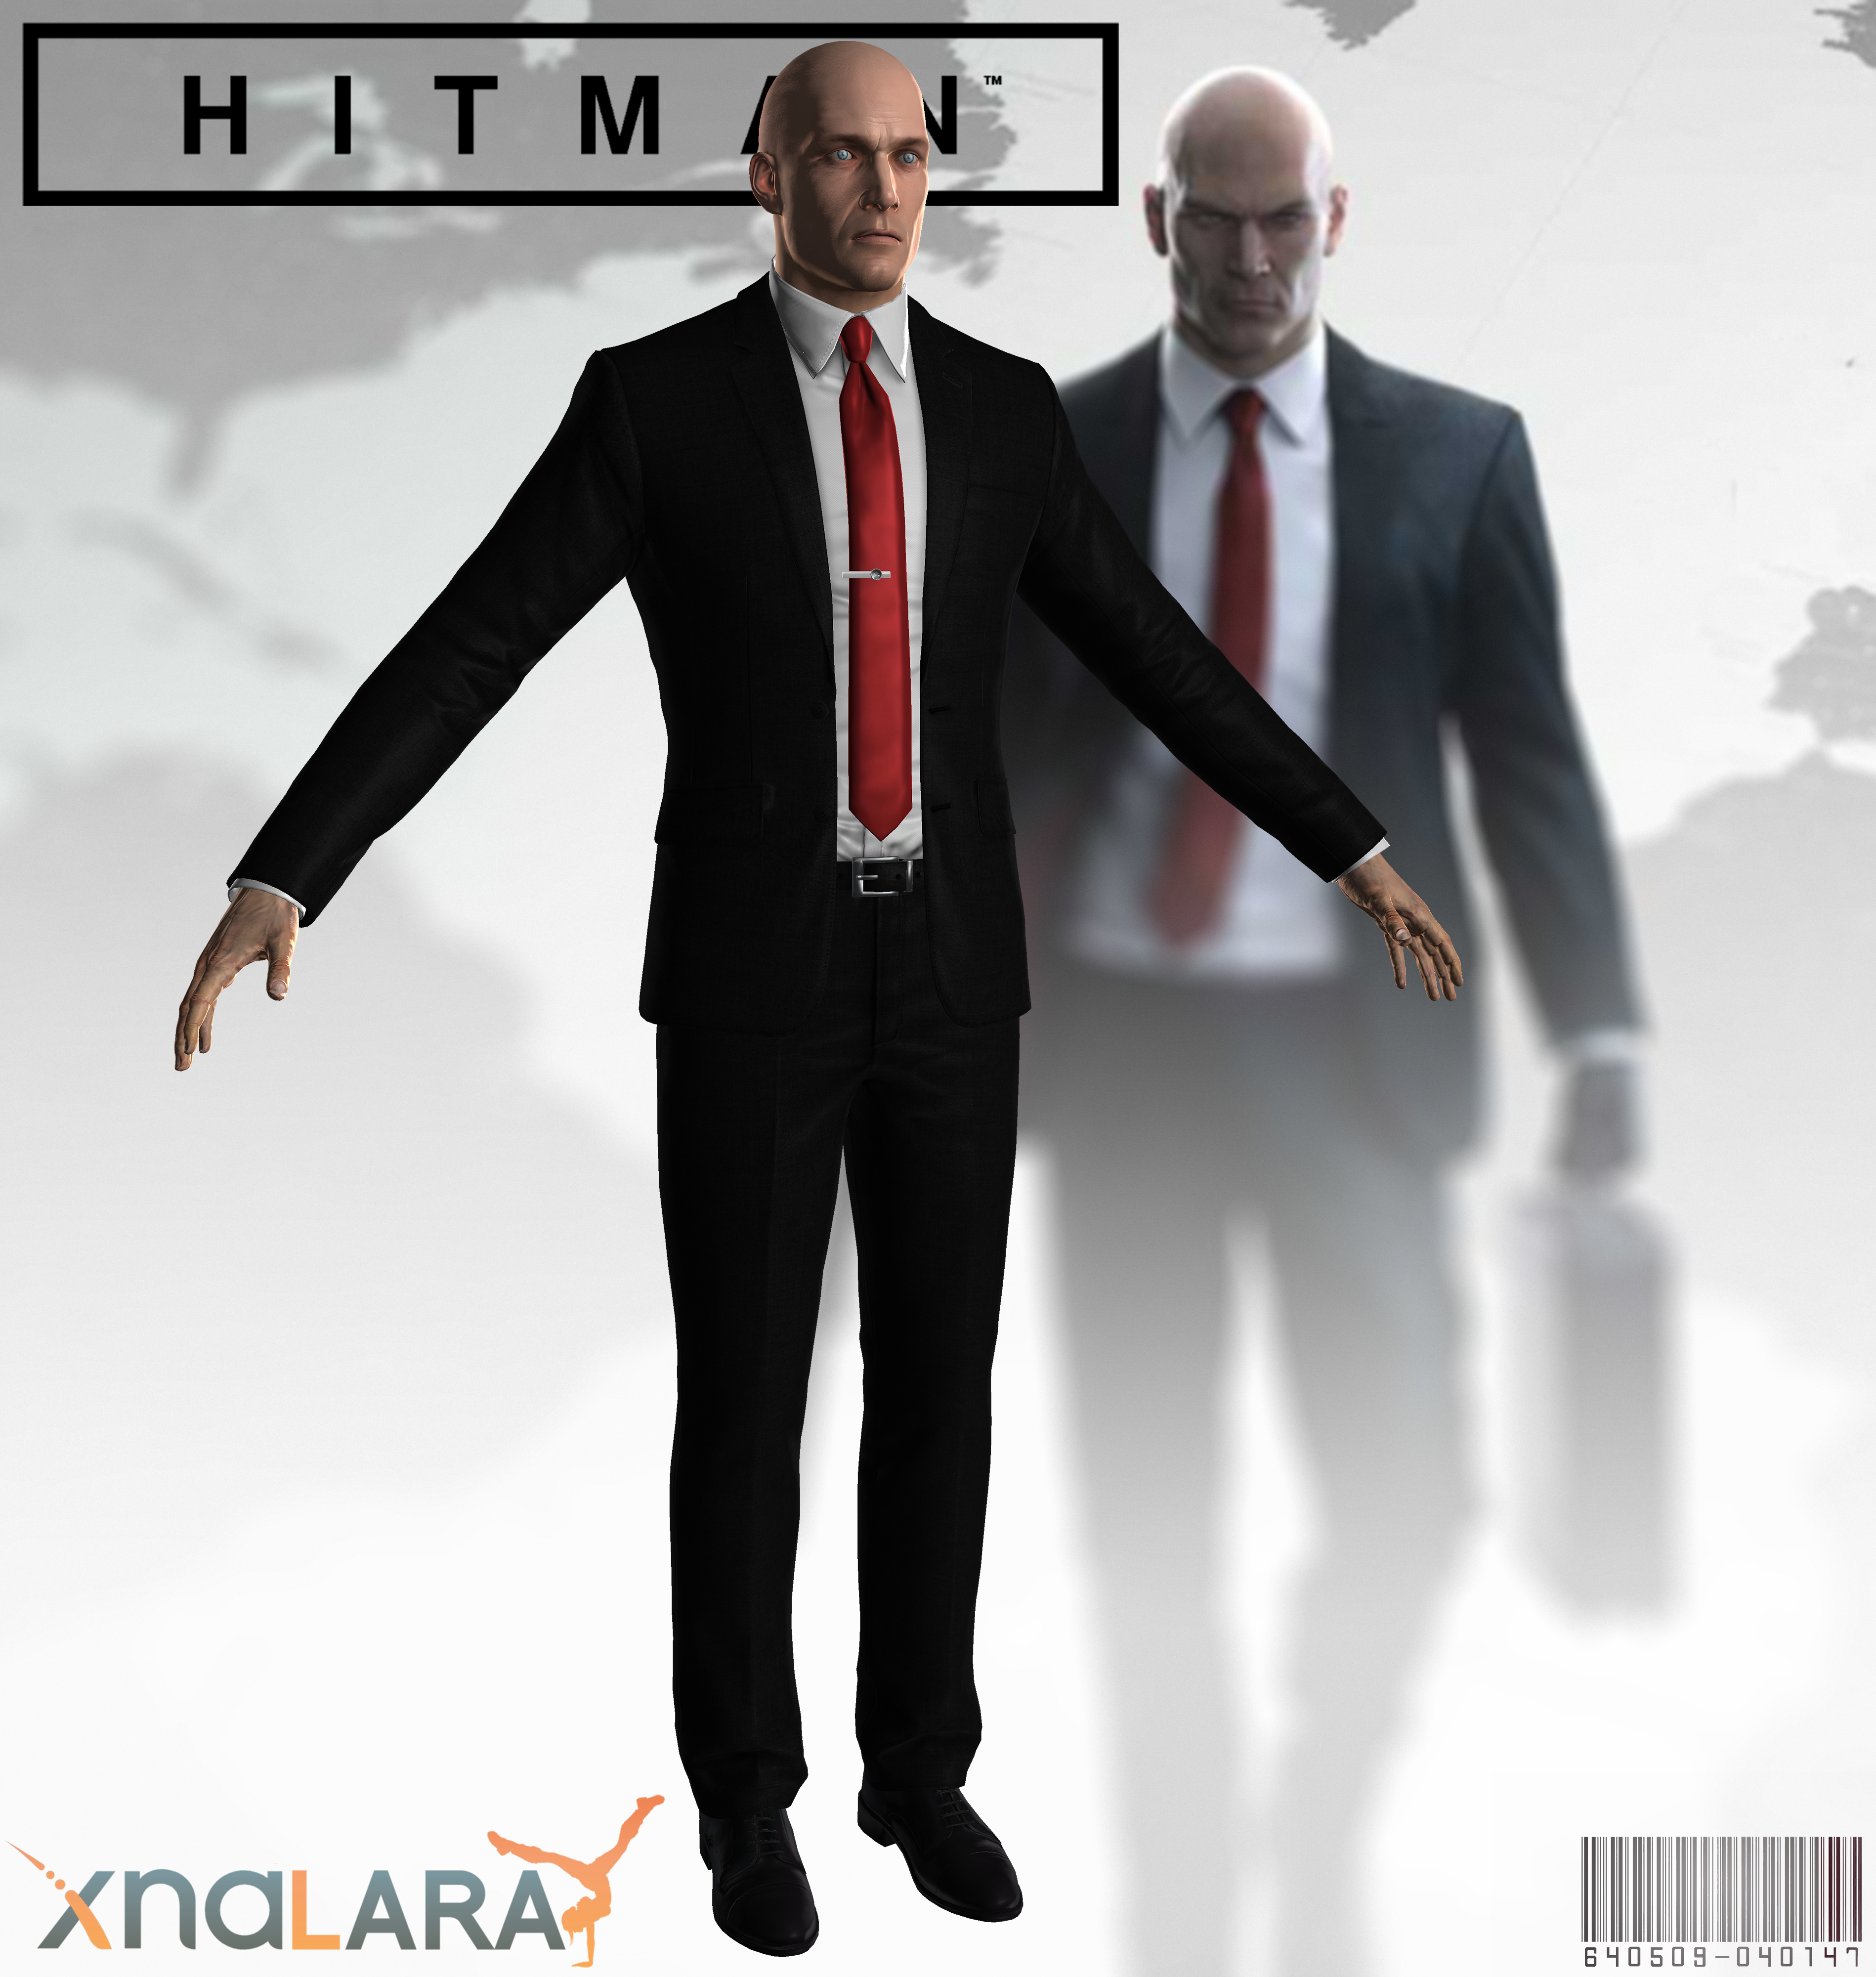 Is the any way I could mod the Hitman 3 suit textures? I'm trying